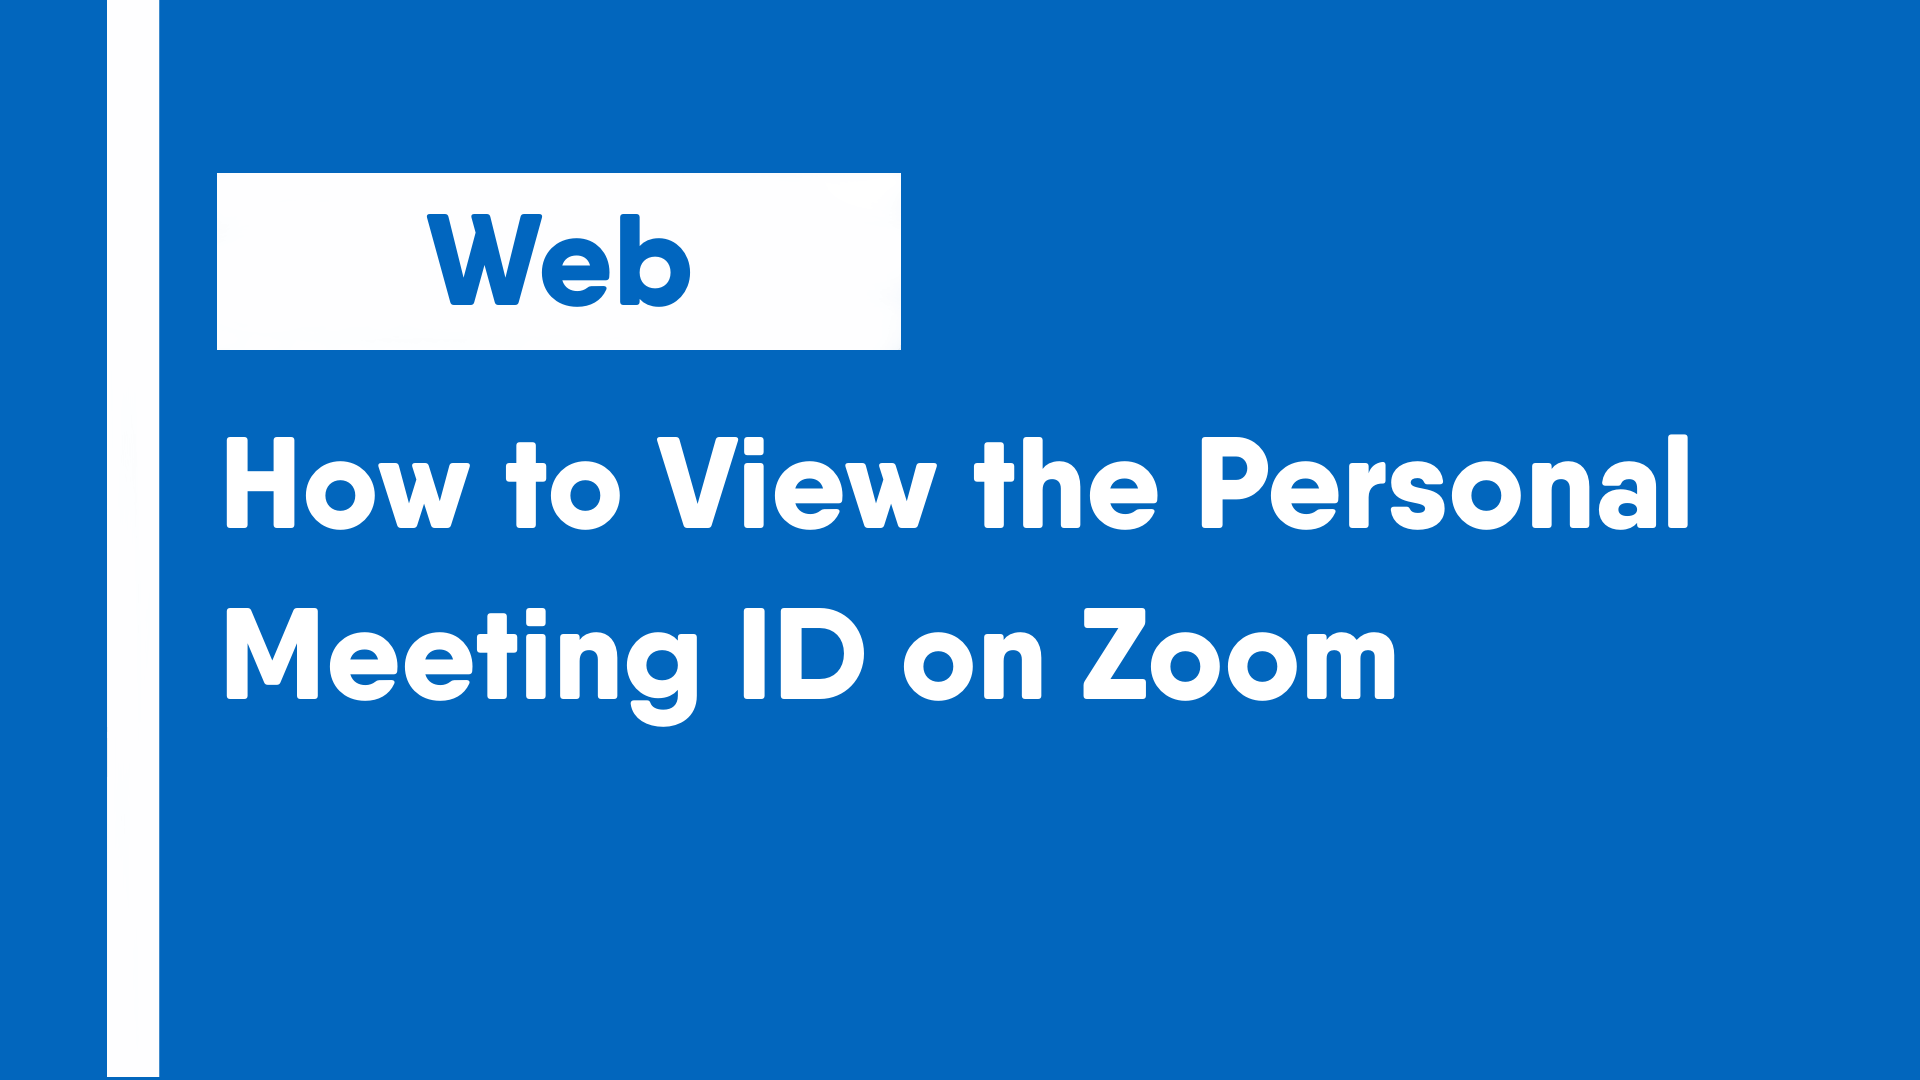 How to View the Personal Meeting ID on Zoom